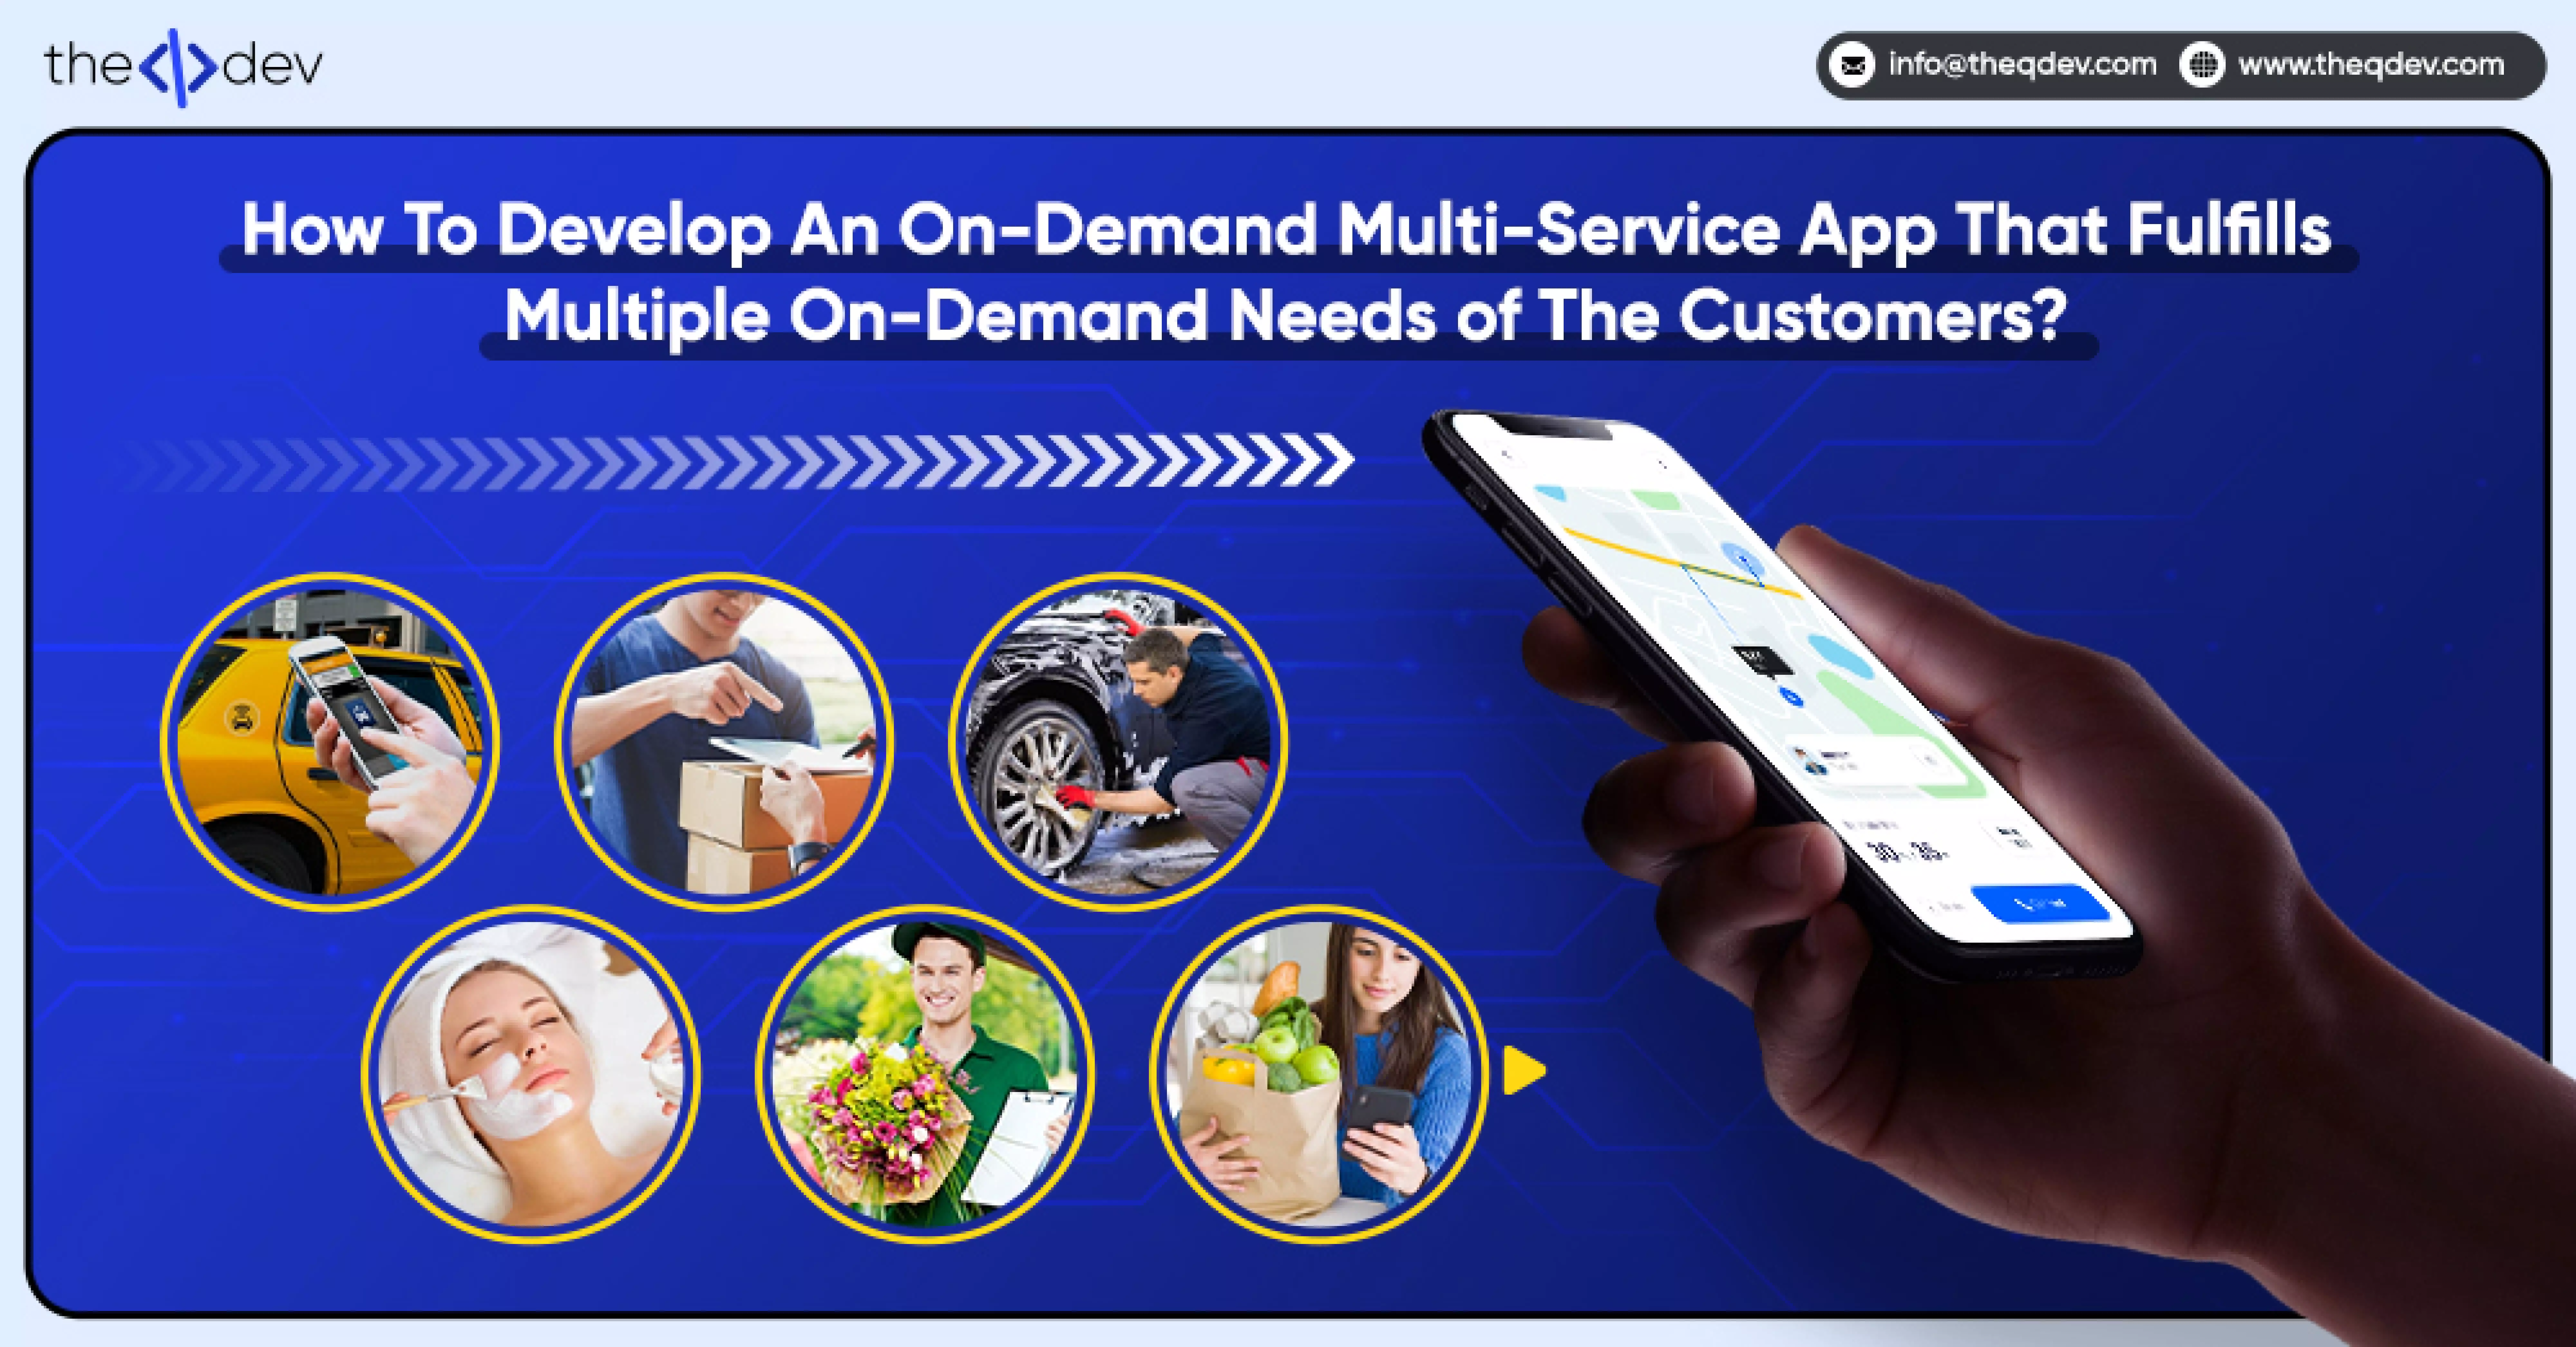 How To Develop An On-Demand Multi-Service App That Fulfills Multiple On-Demand Need